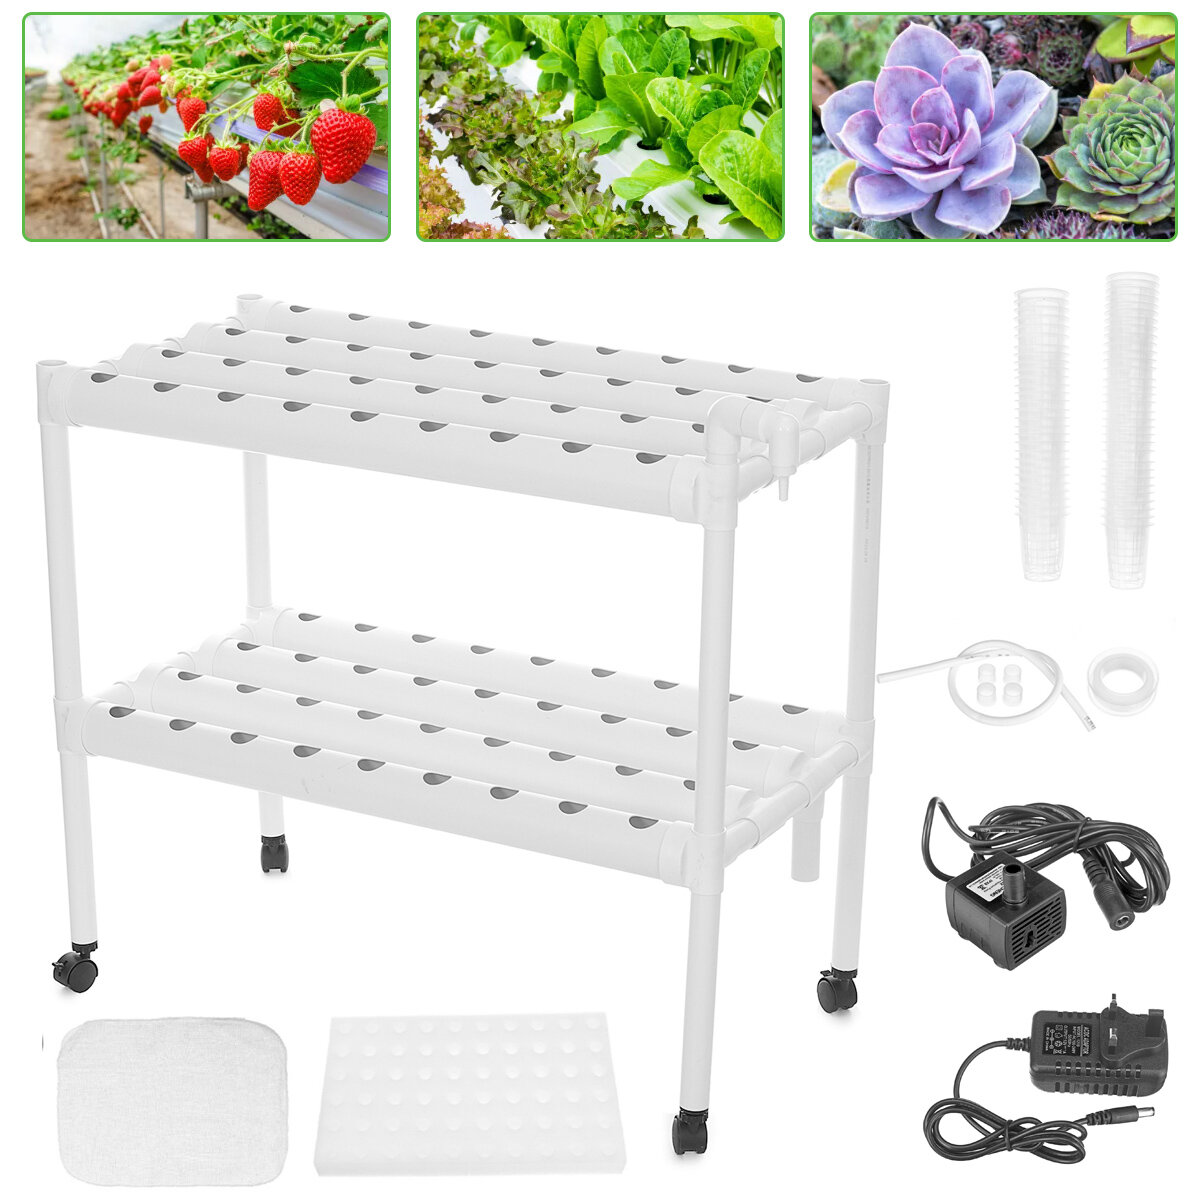 best price,layer,vertical,hydroponic,growing,kit,pipes,holes,eu,discount